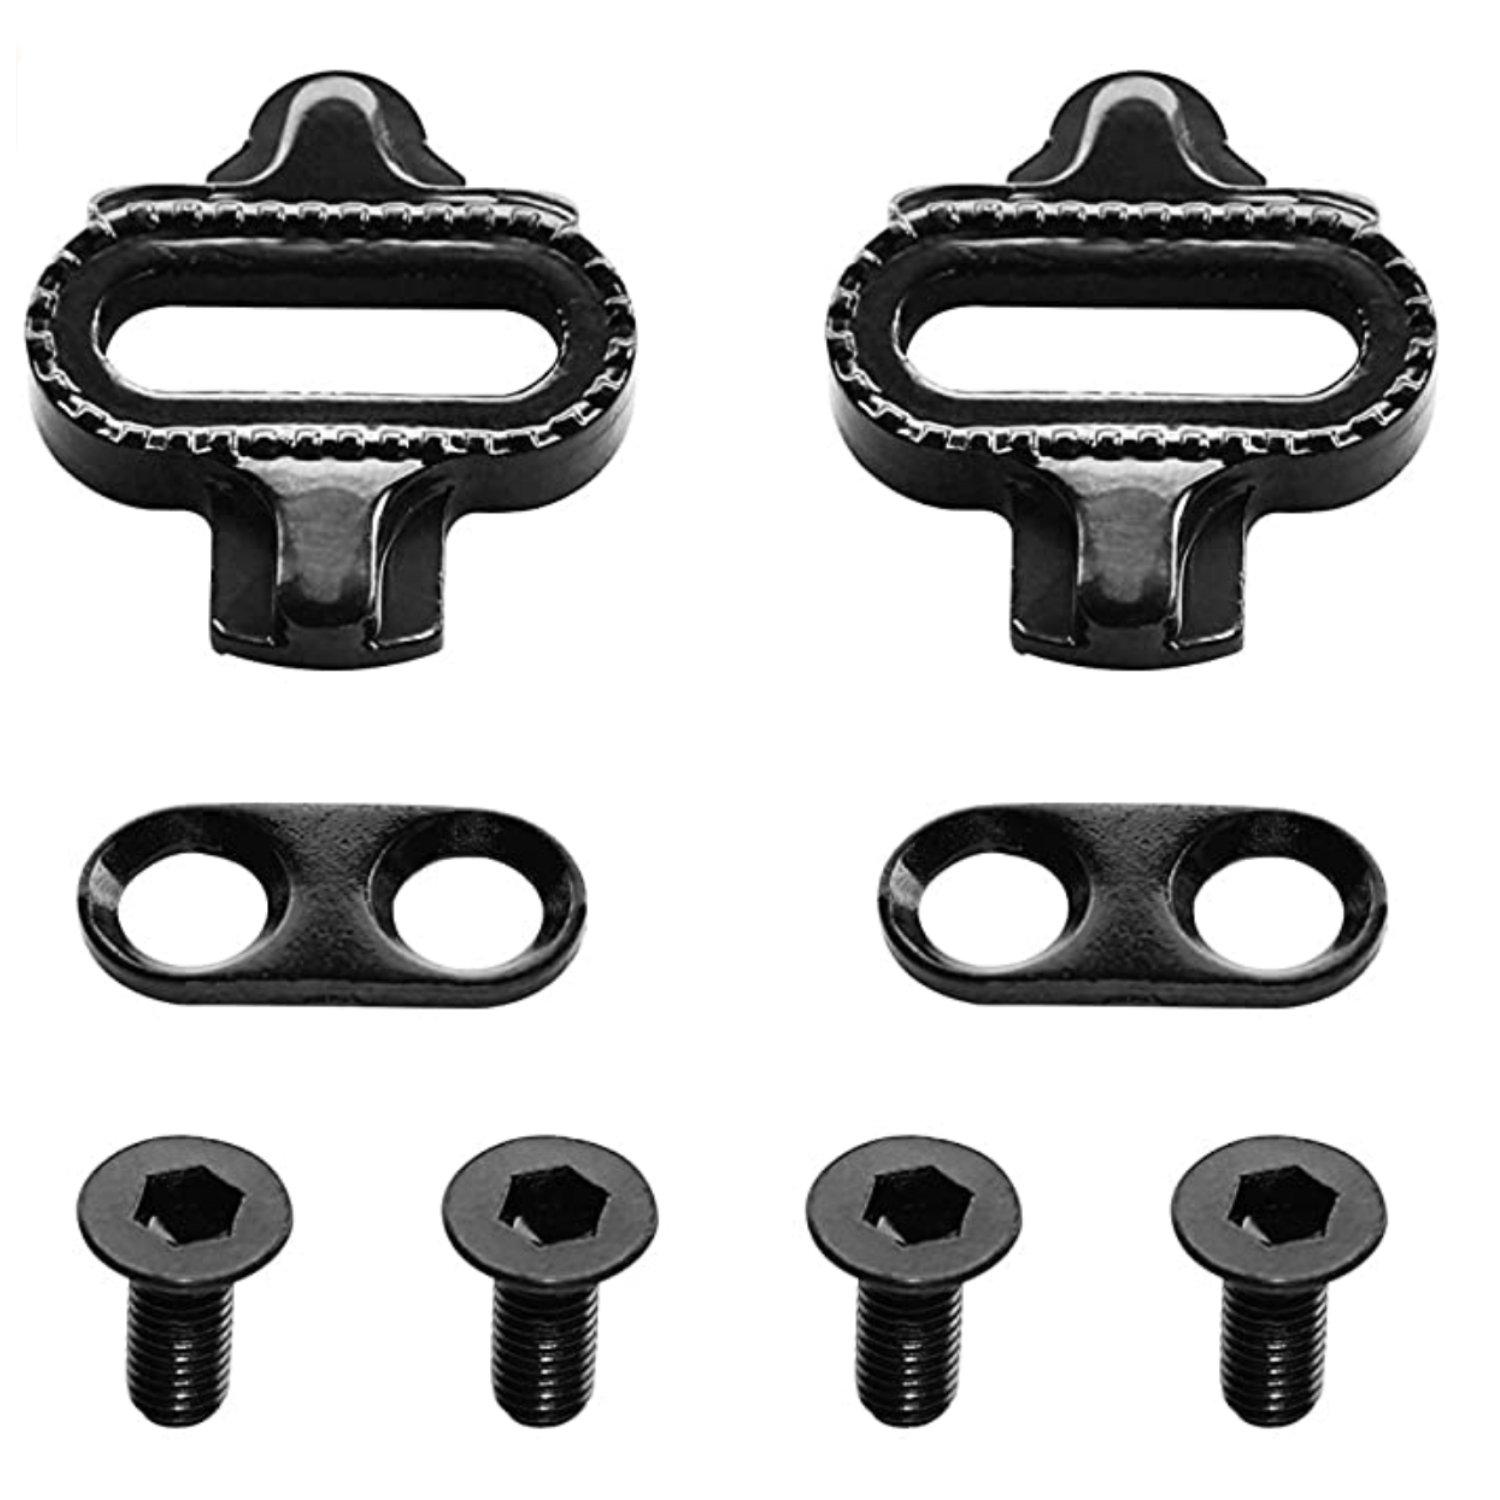 mtb cleat pedals